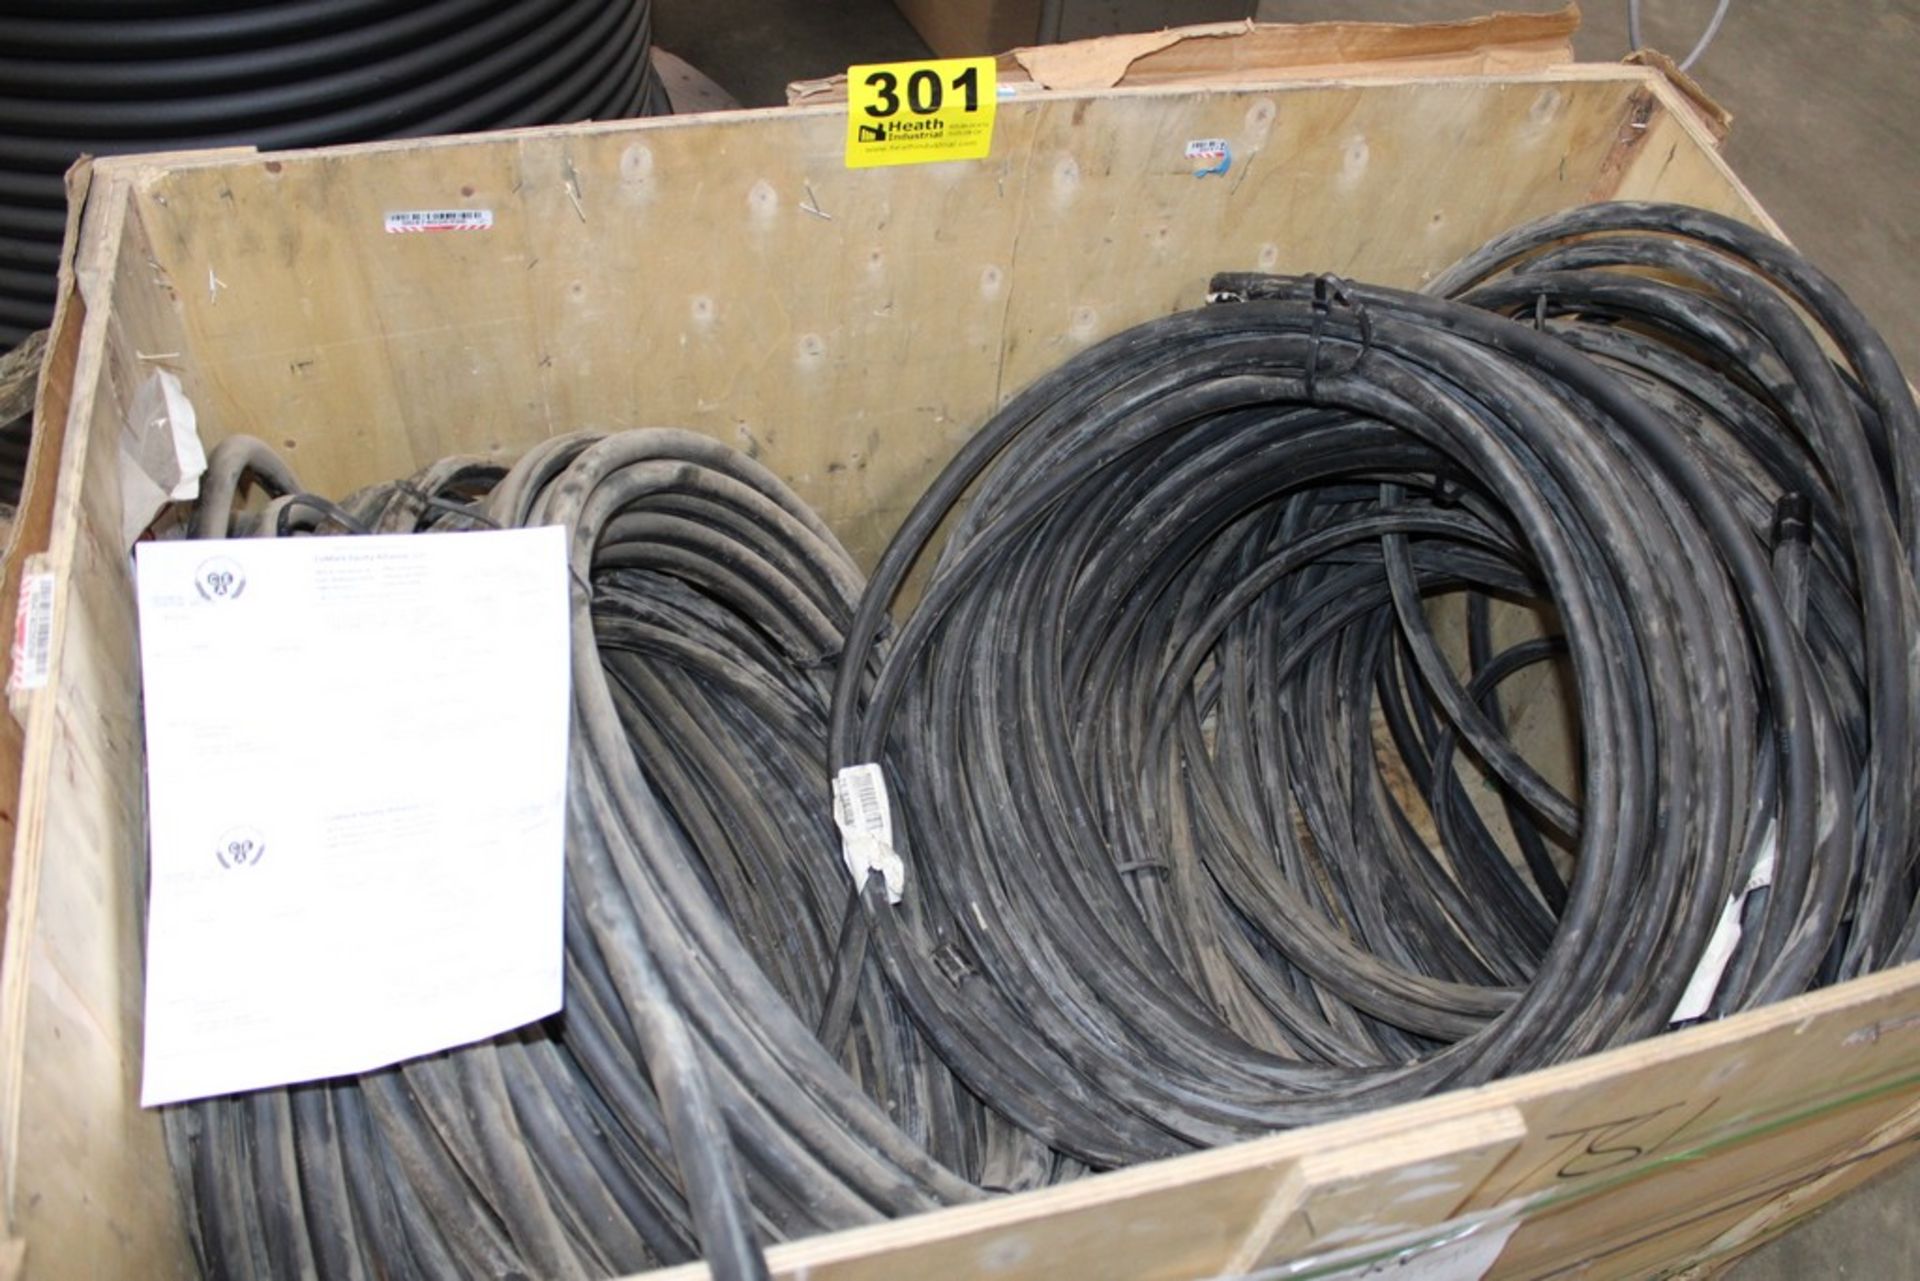 LARGE CAPACITY WIRE IN CRATE, TOTAL WEIGHT 600LB.